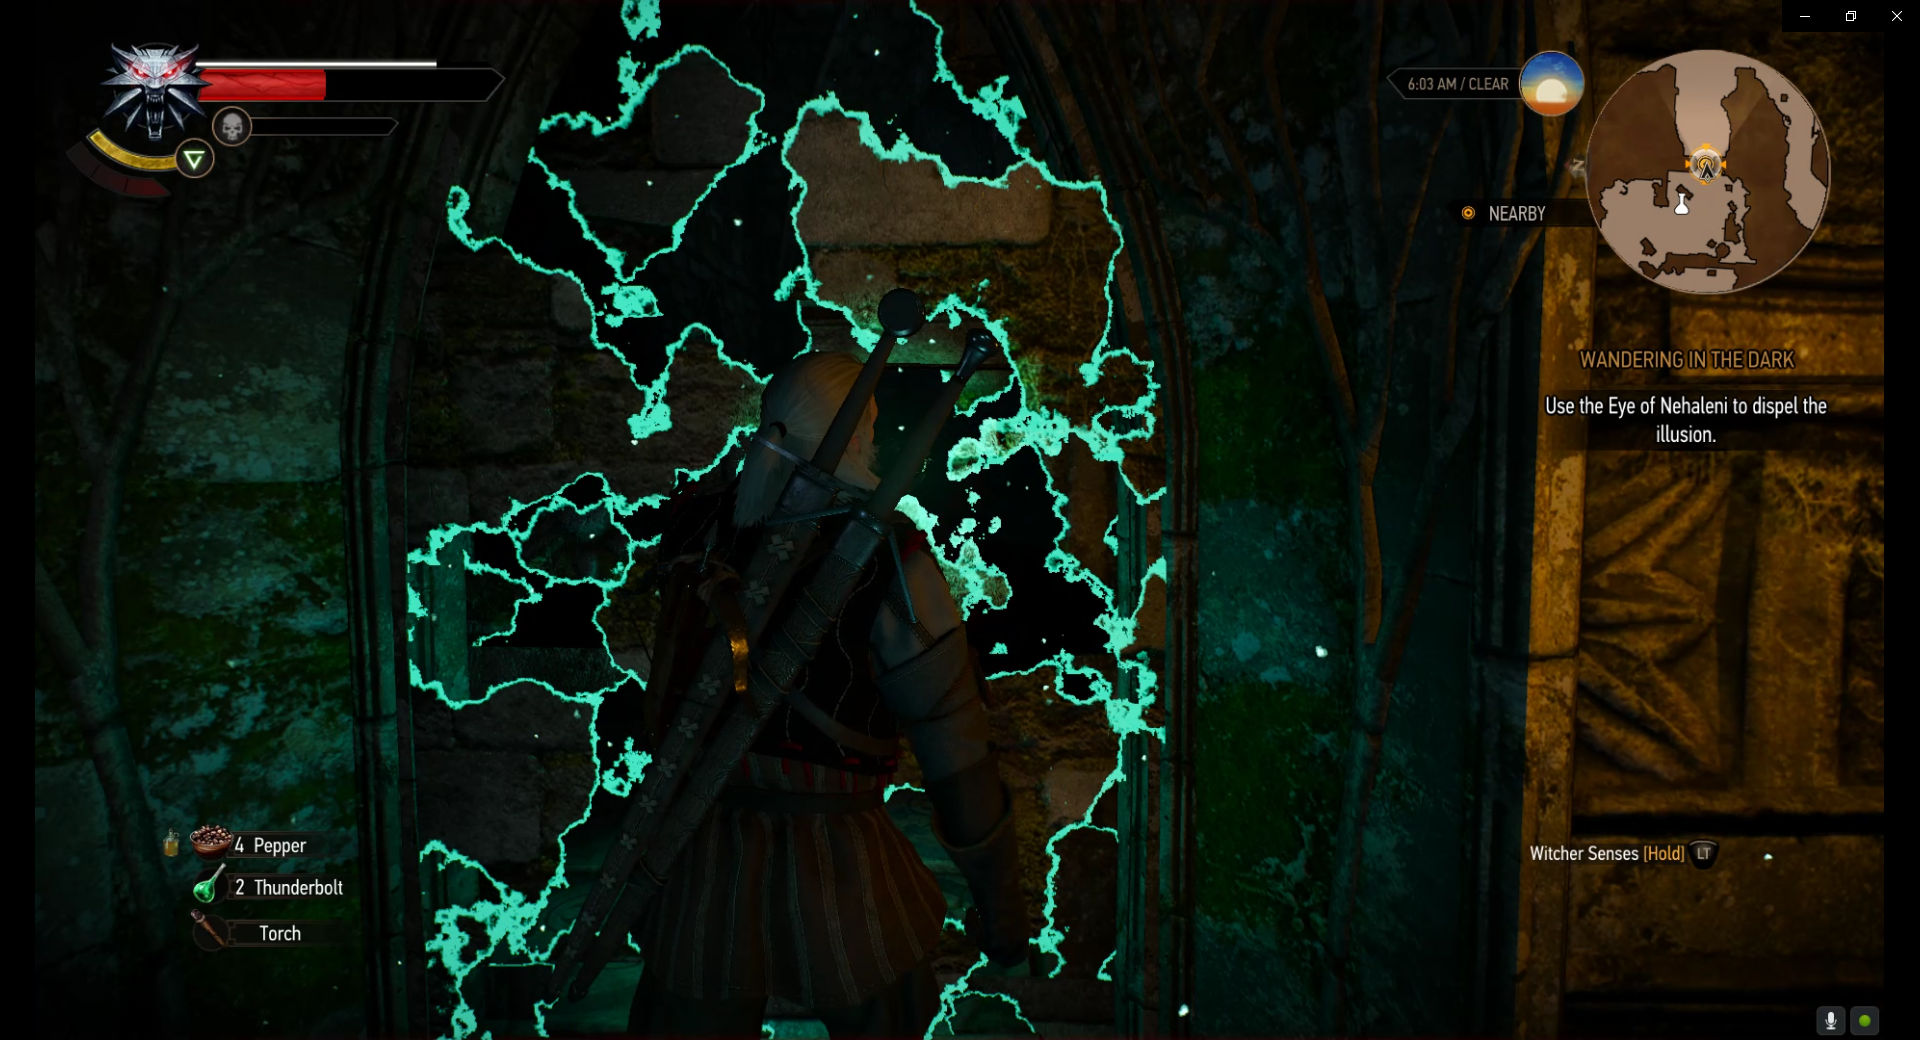 The Witcher 3 Strategy： Wandering in the Dark (Main Quest) – Velen